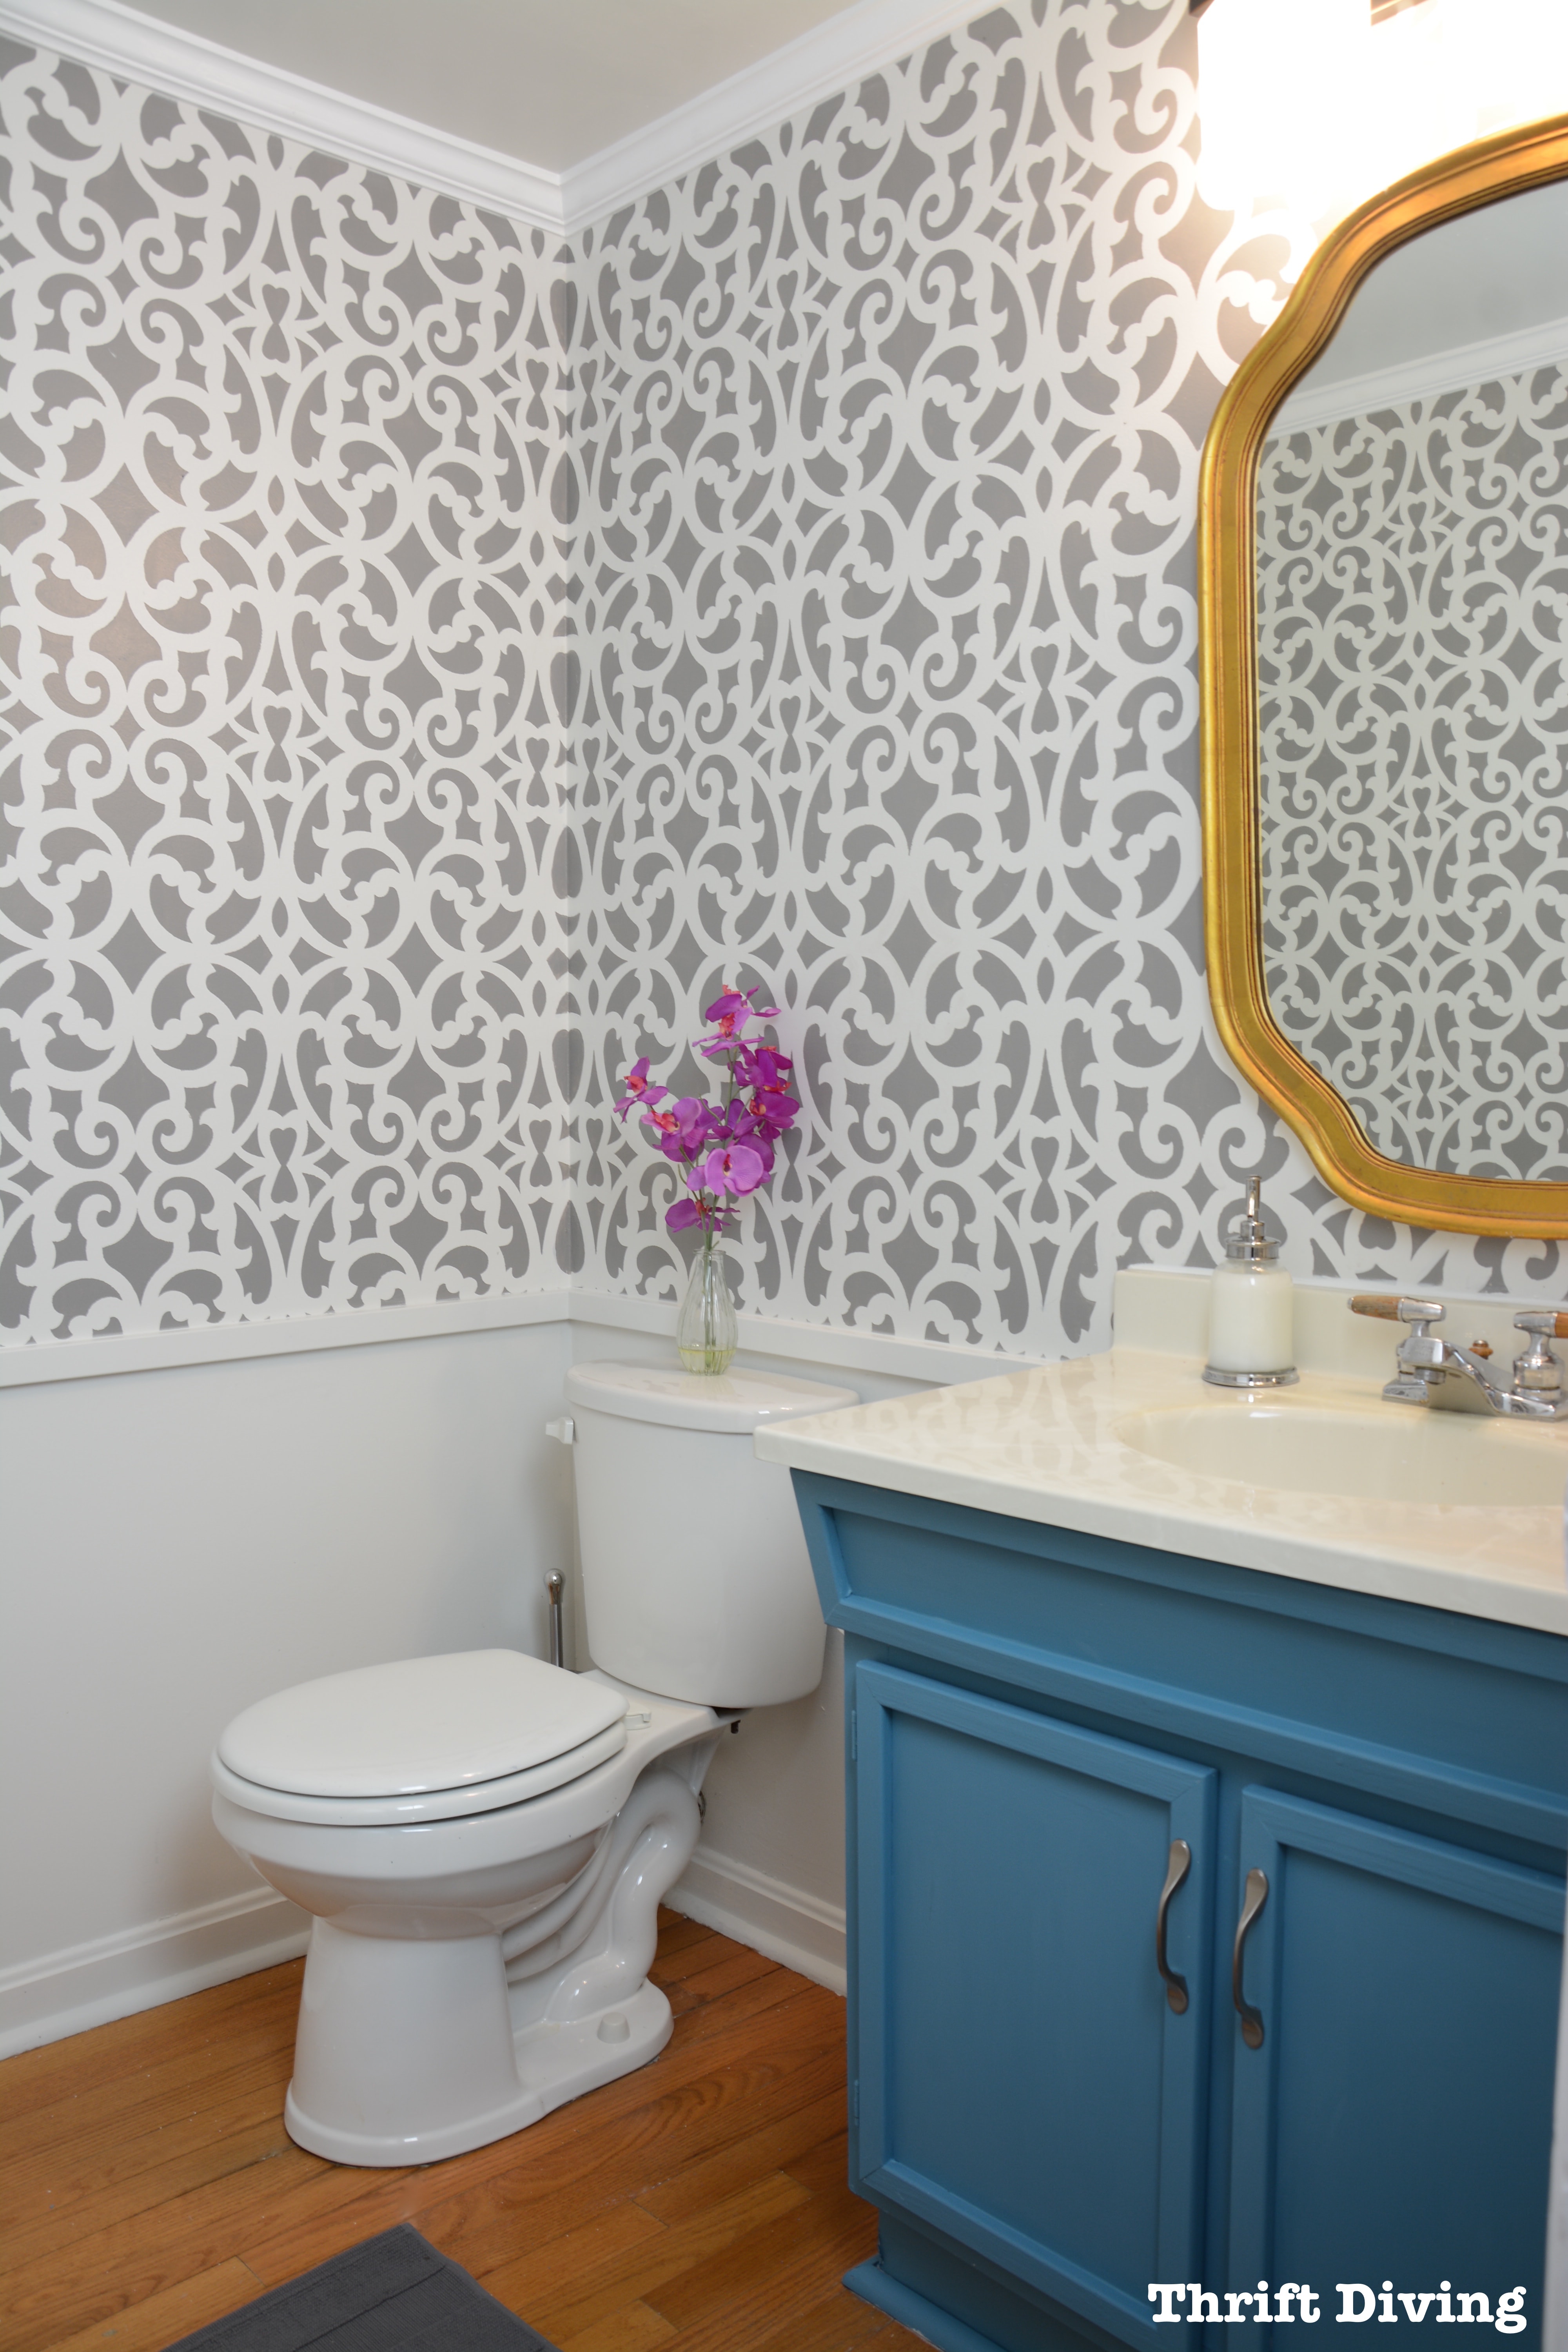 BEFORE & AFTER: My Colorful Gray Bathroom Makeover With a Wall Stencil!